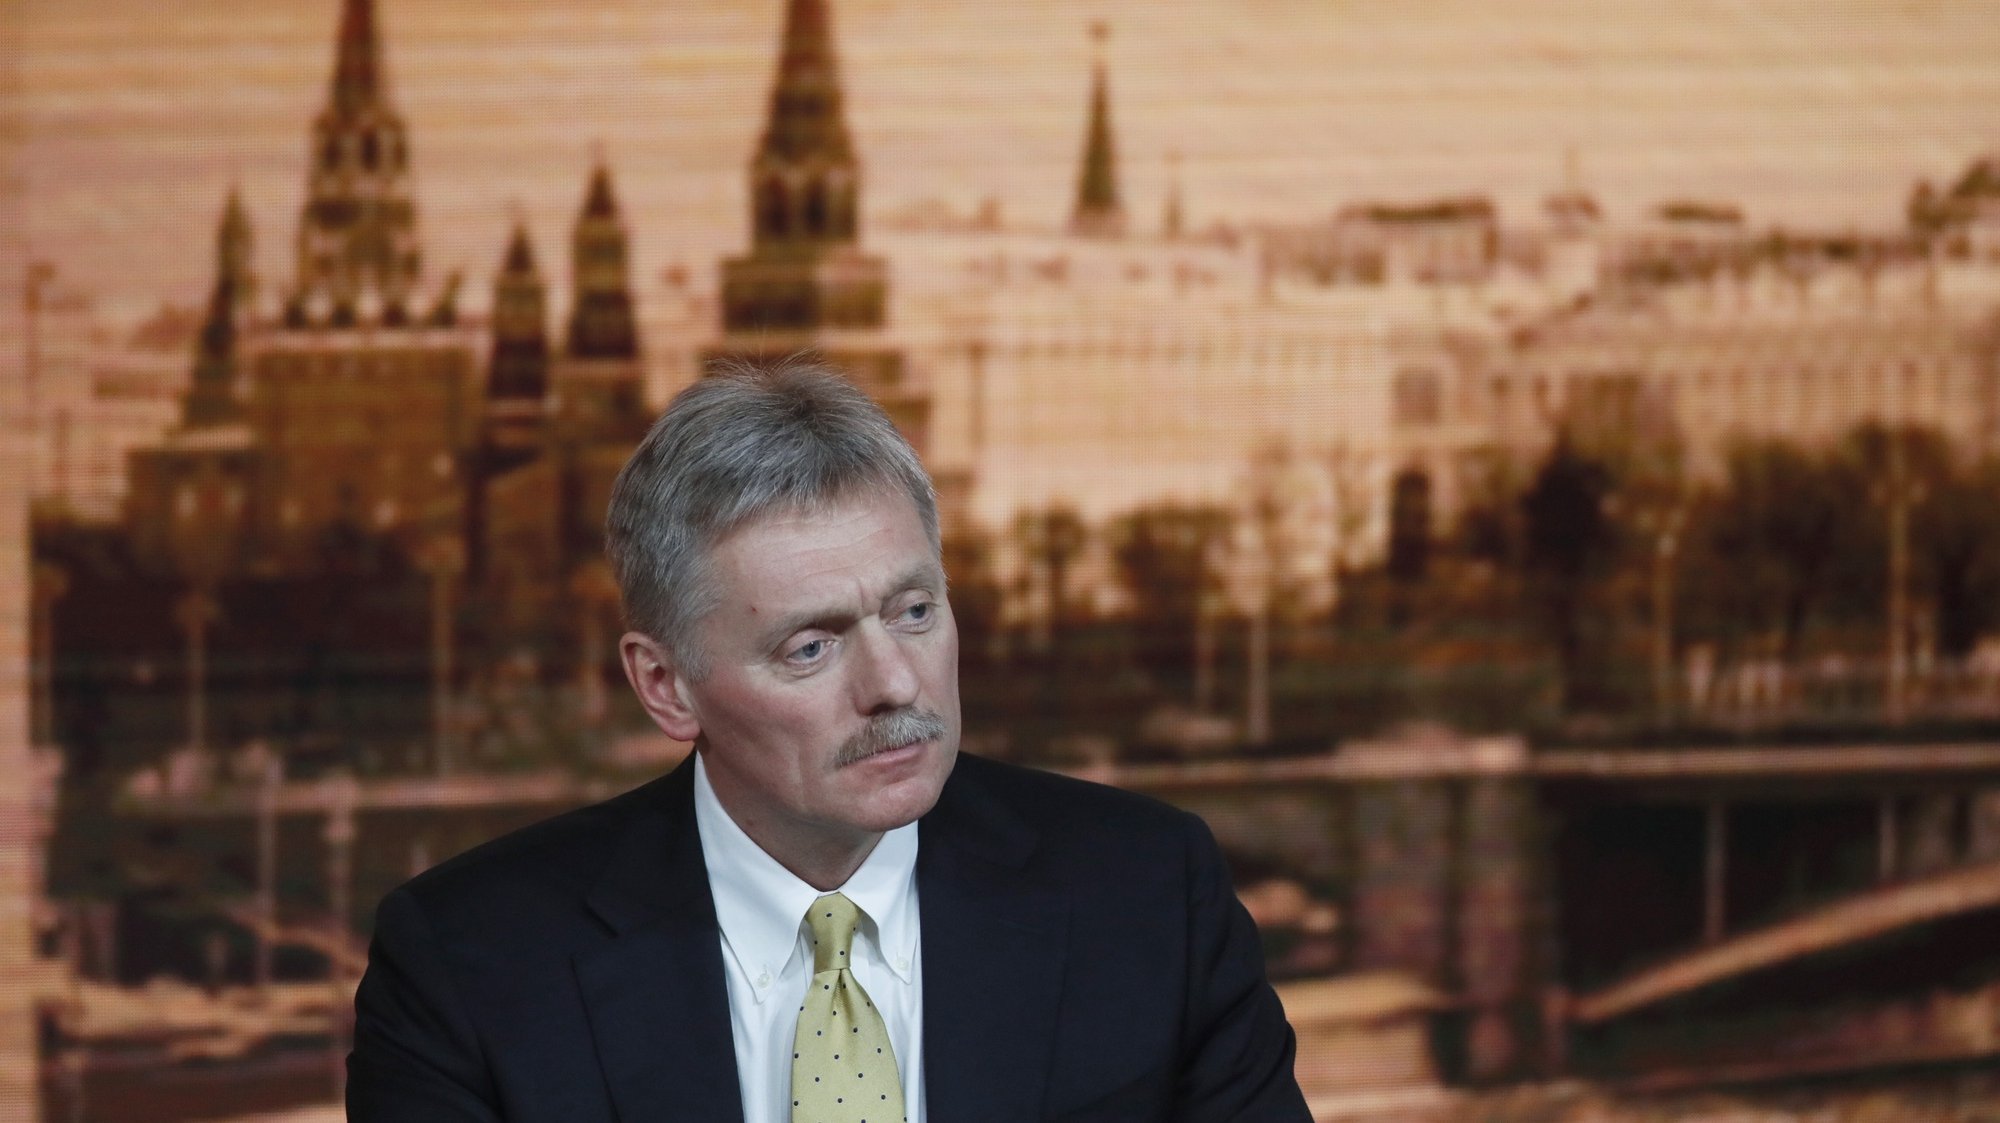 epa08416803 (FILE)  Kremlin spokesman Dmitry Peskov attends Russian President Vladimir Putin&#039;s annual life-broadcasted news conference with Russian and foreign media at the World Trade Center in Moscow, Russia, 19 December 2019 (reissued 12 May 2020). According to reports on 12 May, Kremlin spokesman Dmitry Peskov was hospitalised after testing positive for coronavirus COVID-19.  EPA/YURI KOCHETKOV *** Local Caption *** 55719978